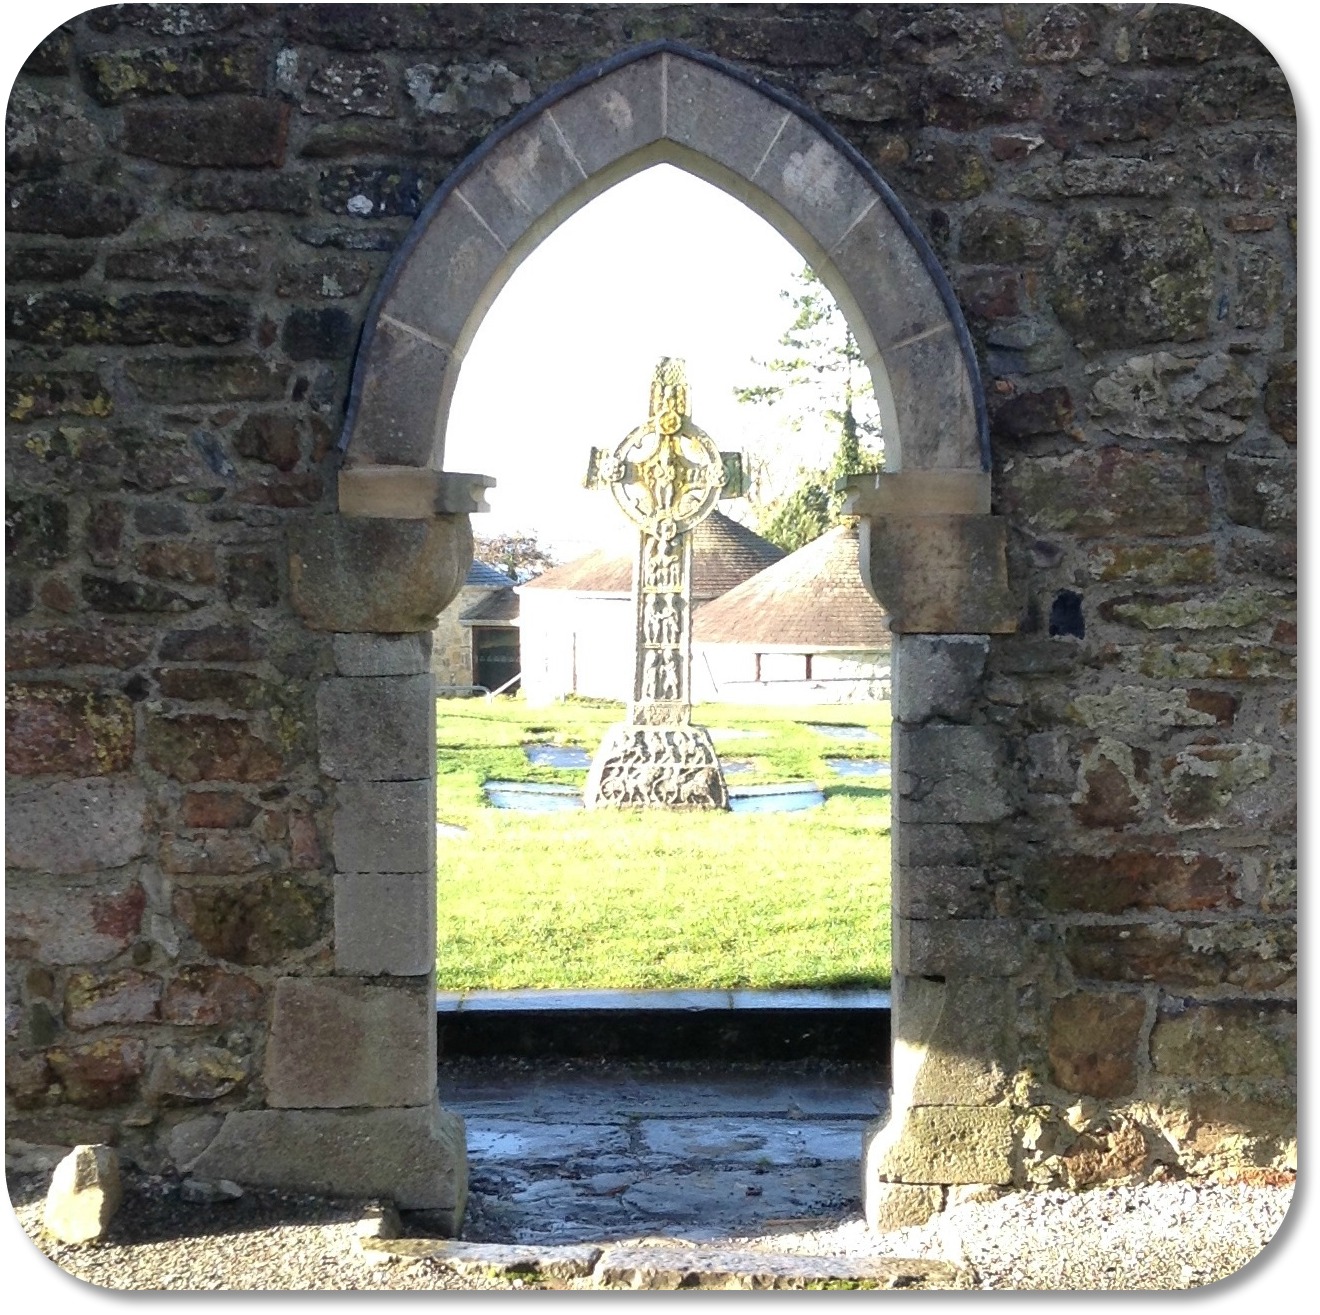 Irish Expressions - Arch at Clonmacnoise Monastery